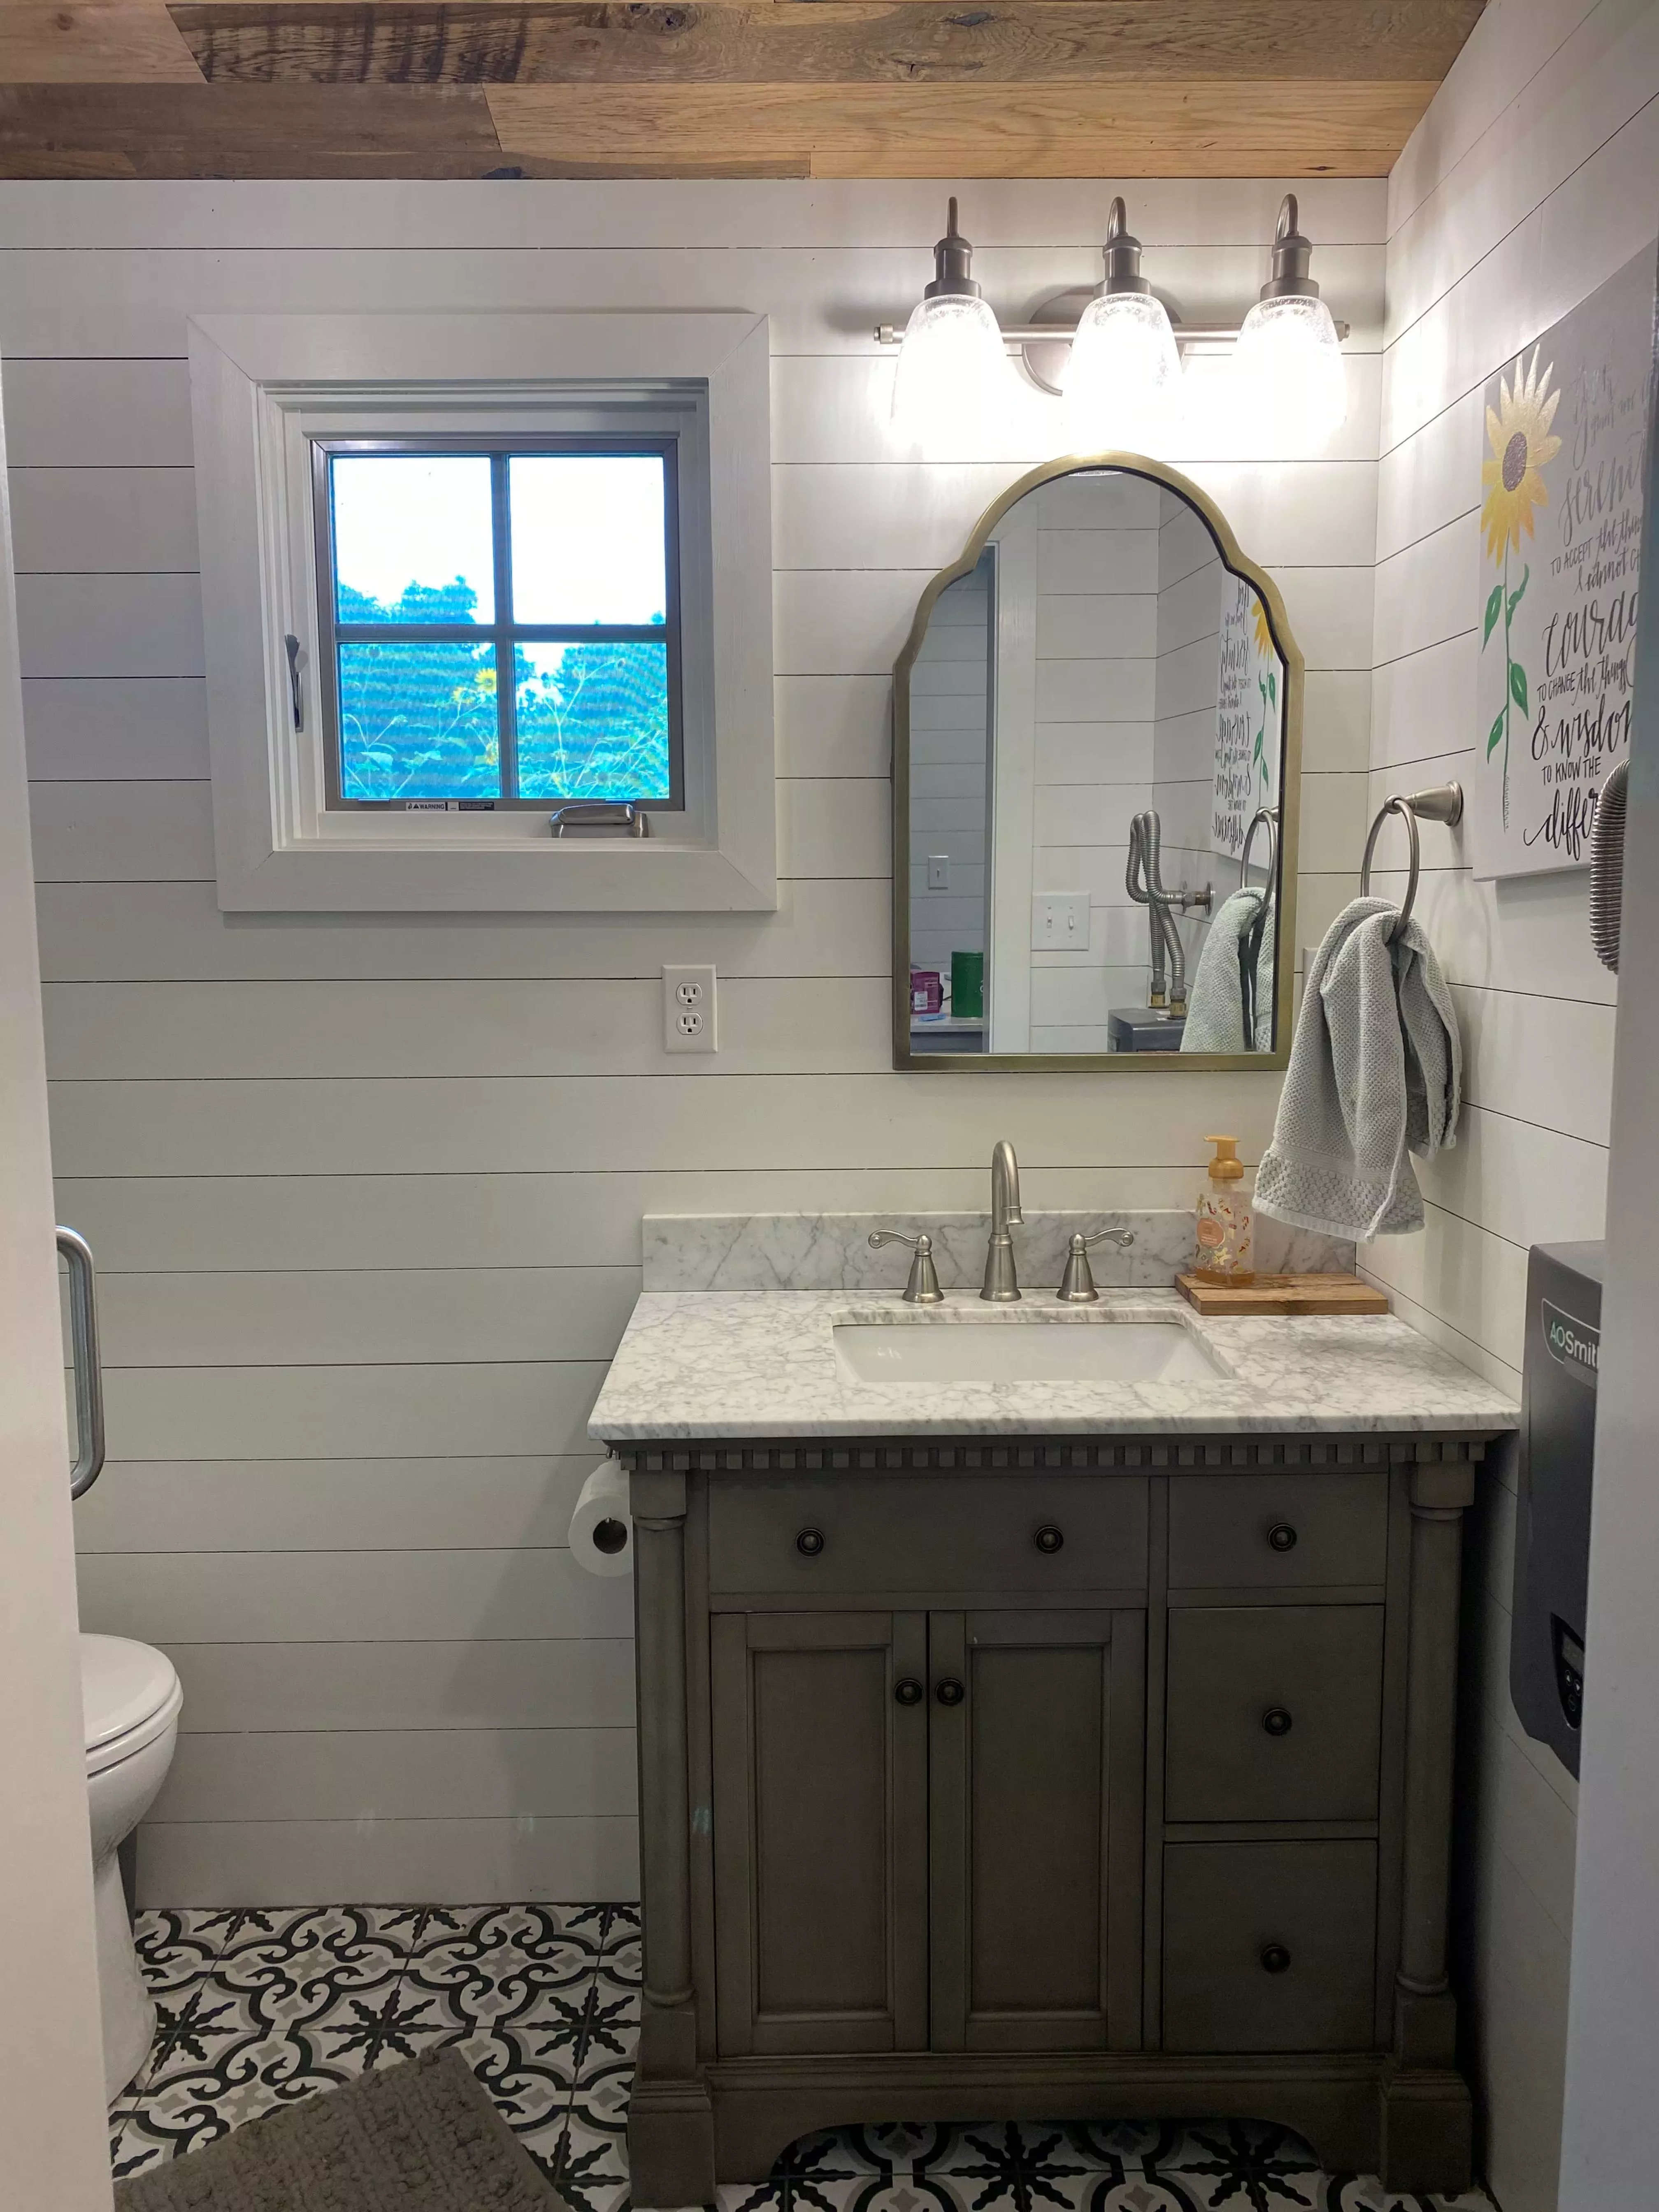 A tiny home bathroom sink and mirror with toilet and small shower.